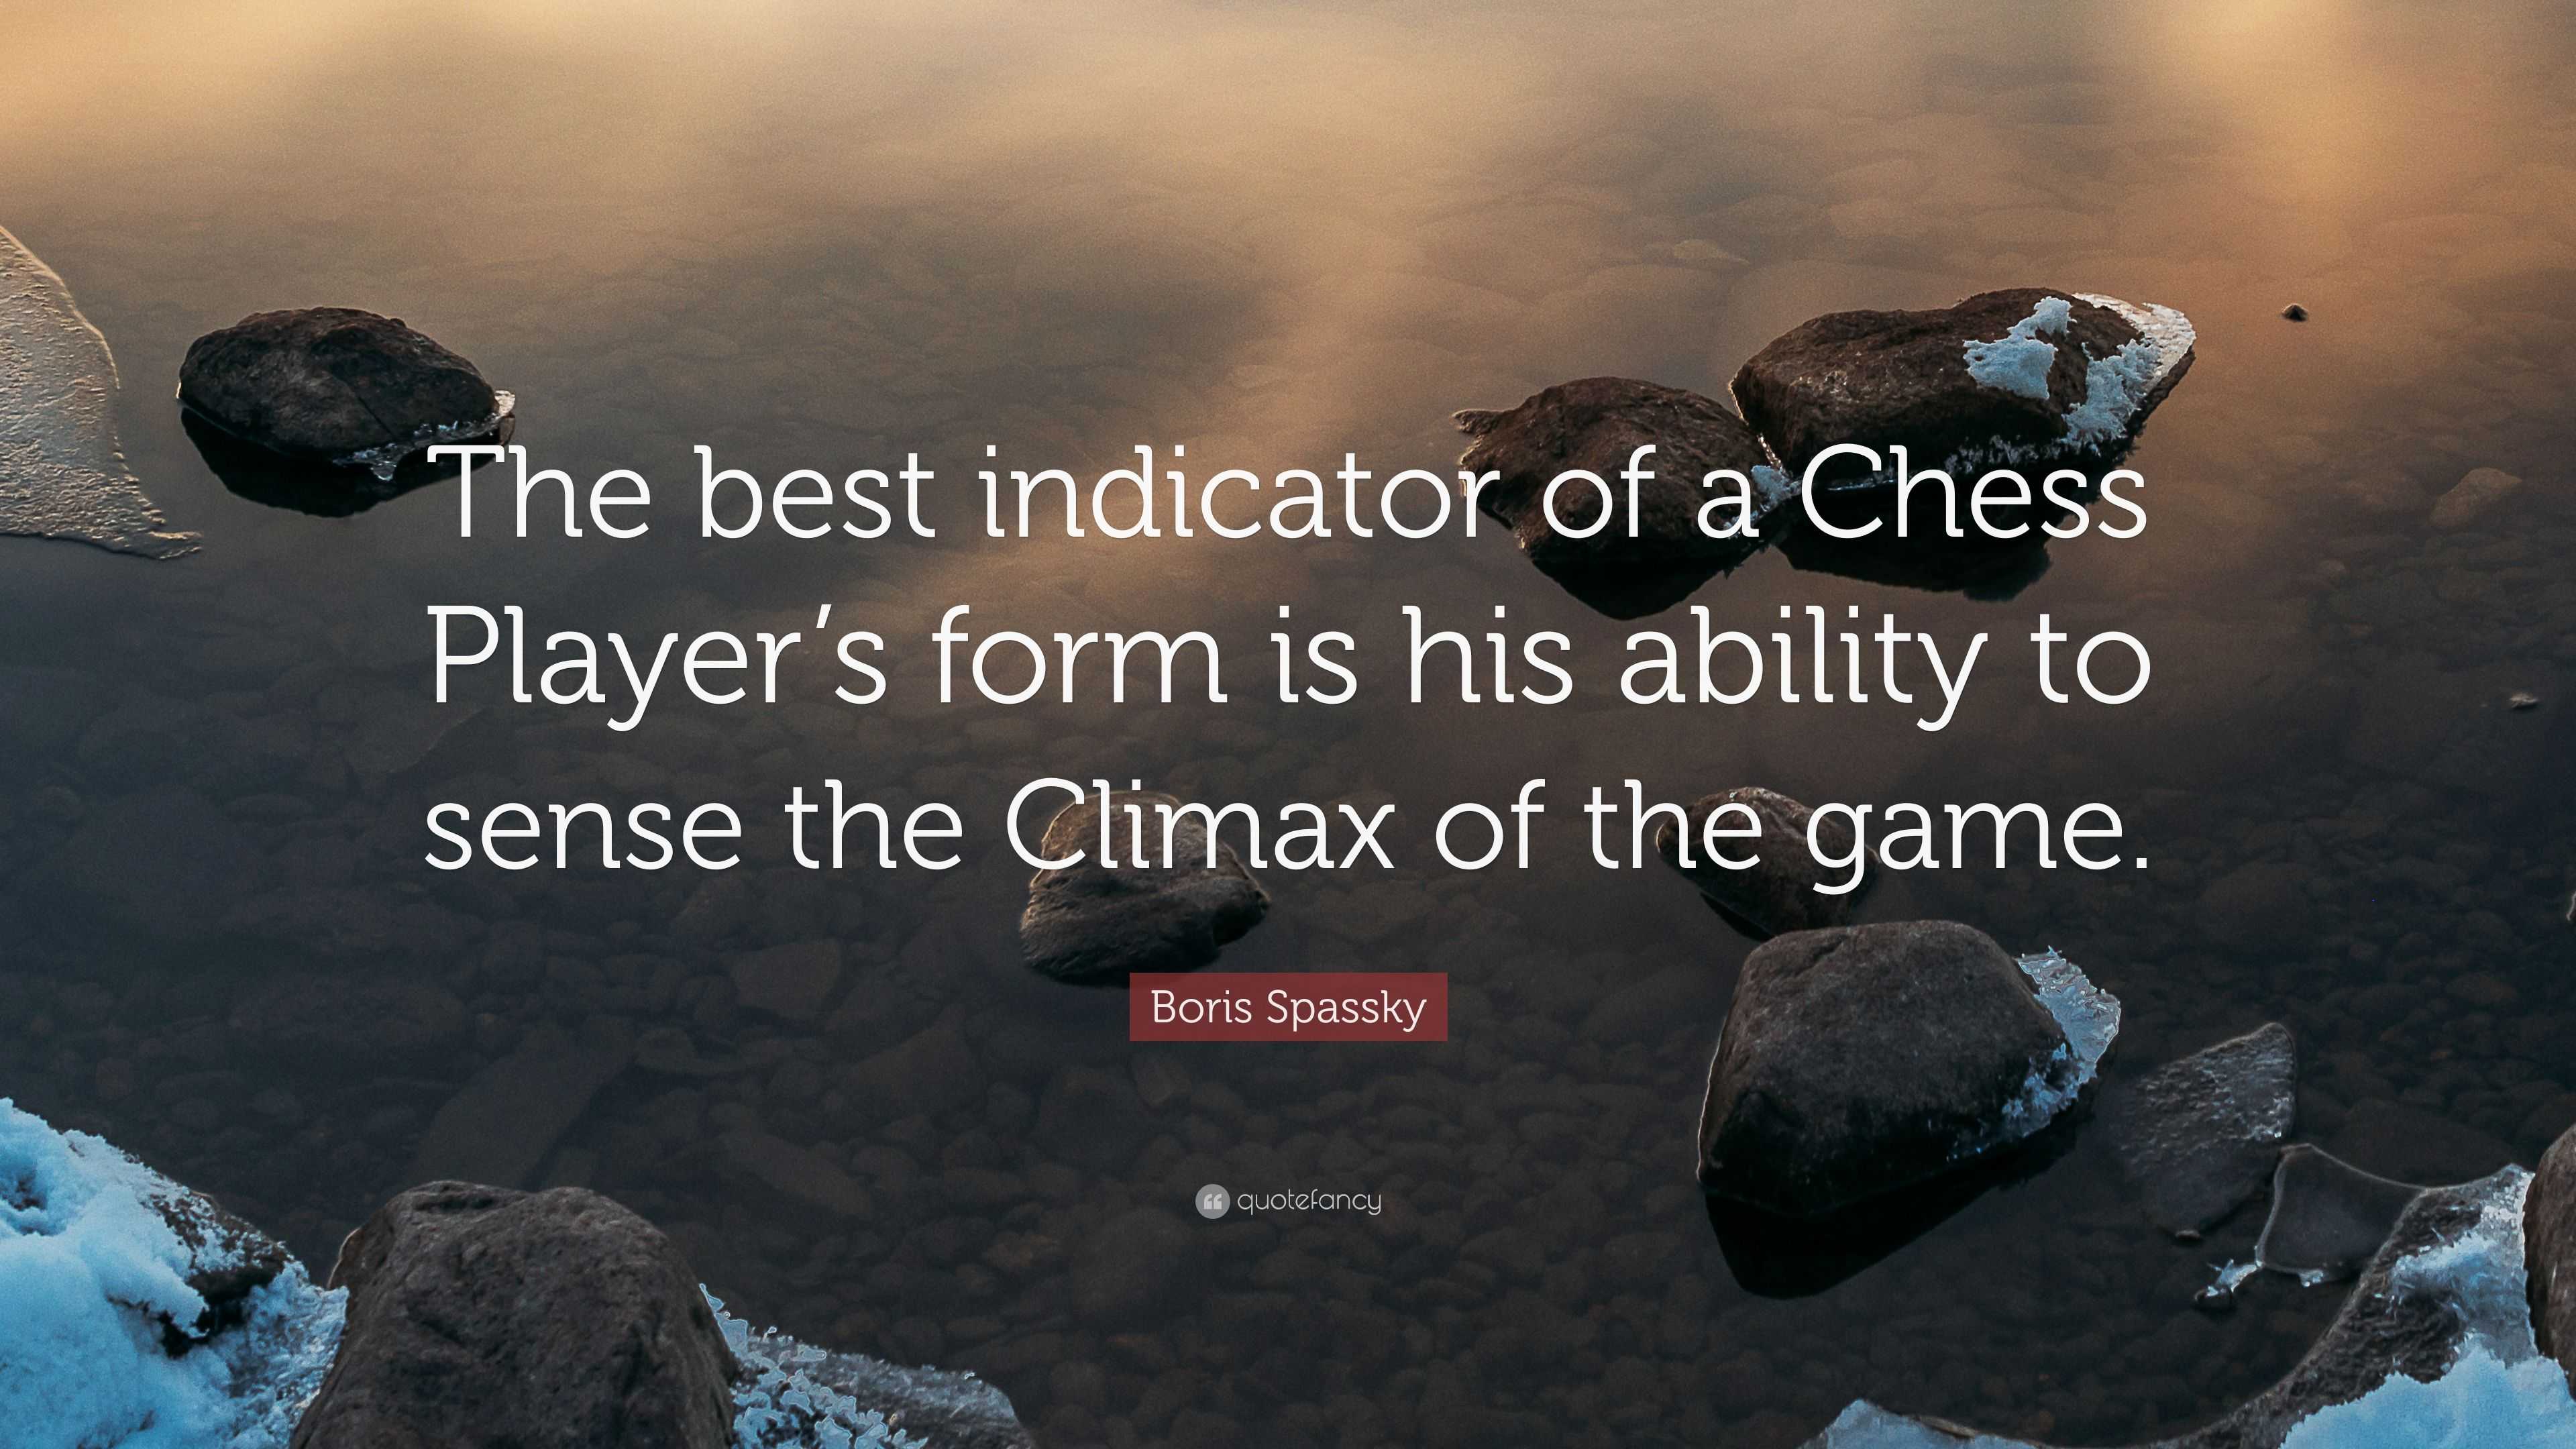 Boris Spassky Quote The Best Indicator Of A Chess Player S Form Is His Ability To Sense The Climax Of The Game 7 Wallpapers Quotefancy,Trust Me Tabouli Recipe